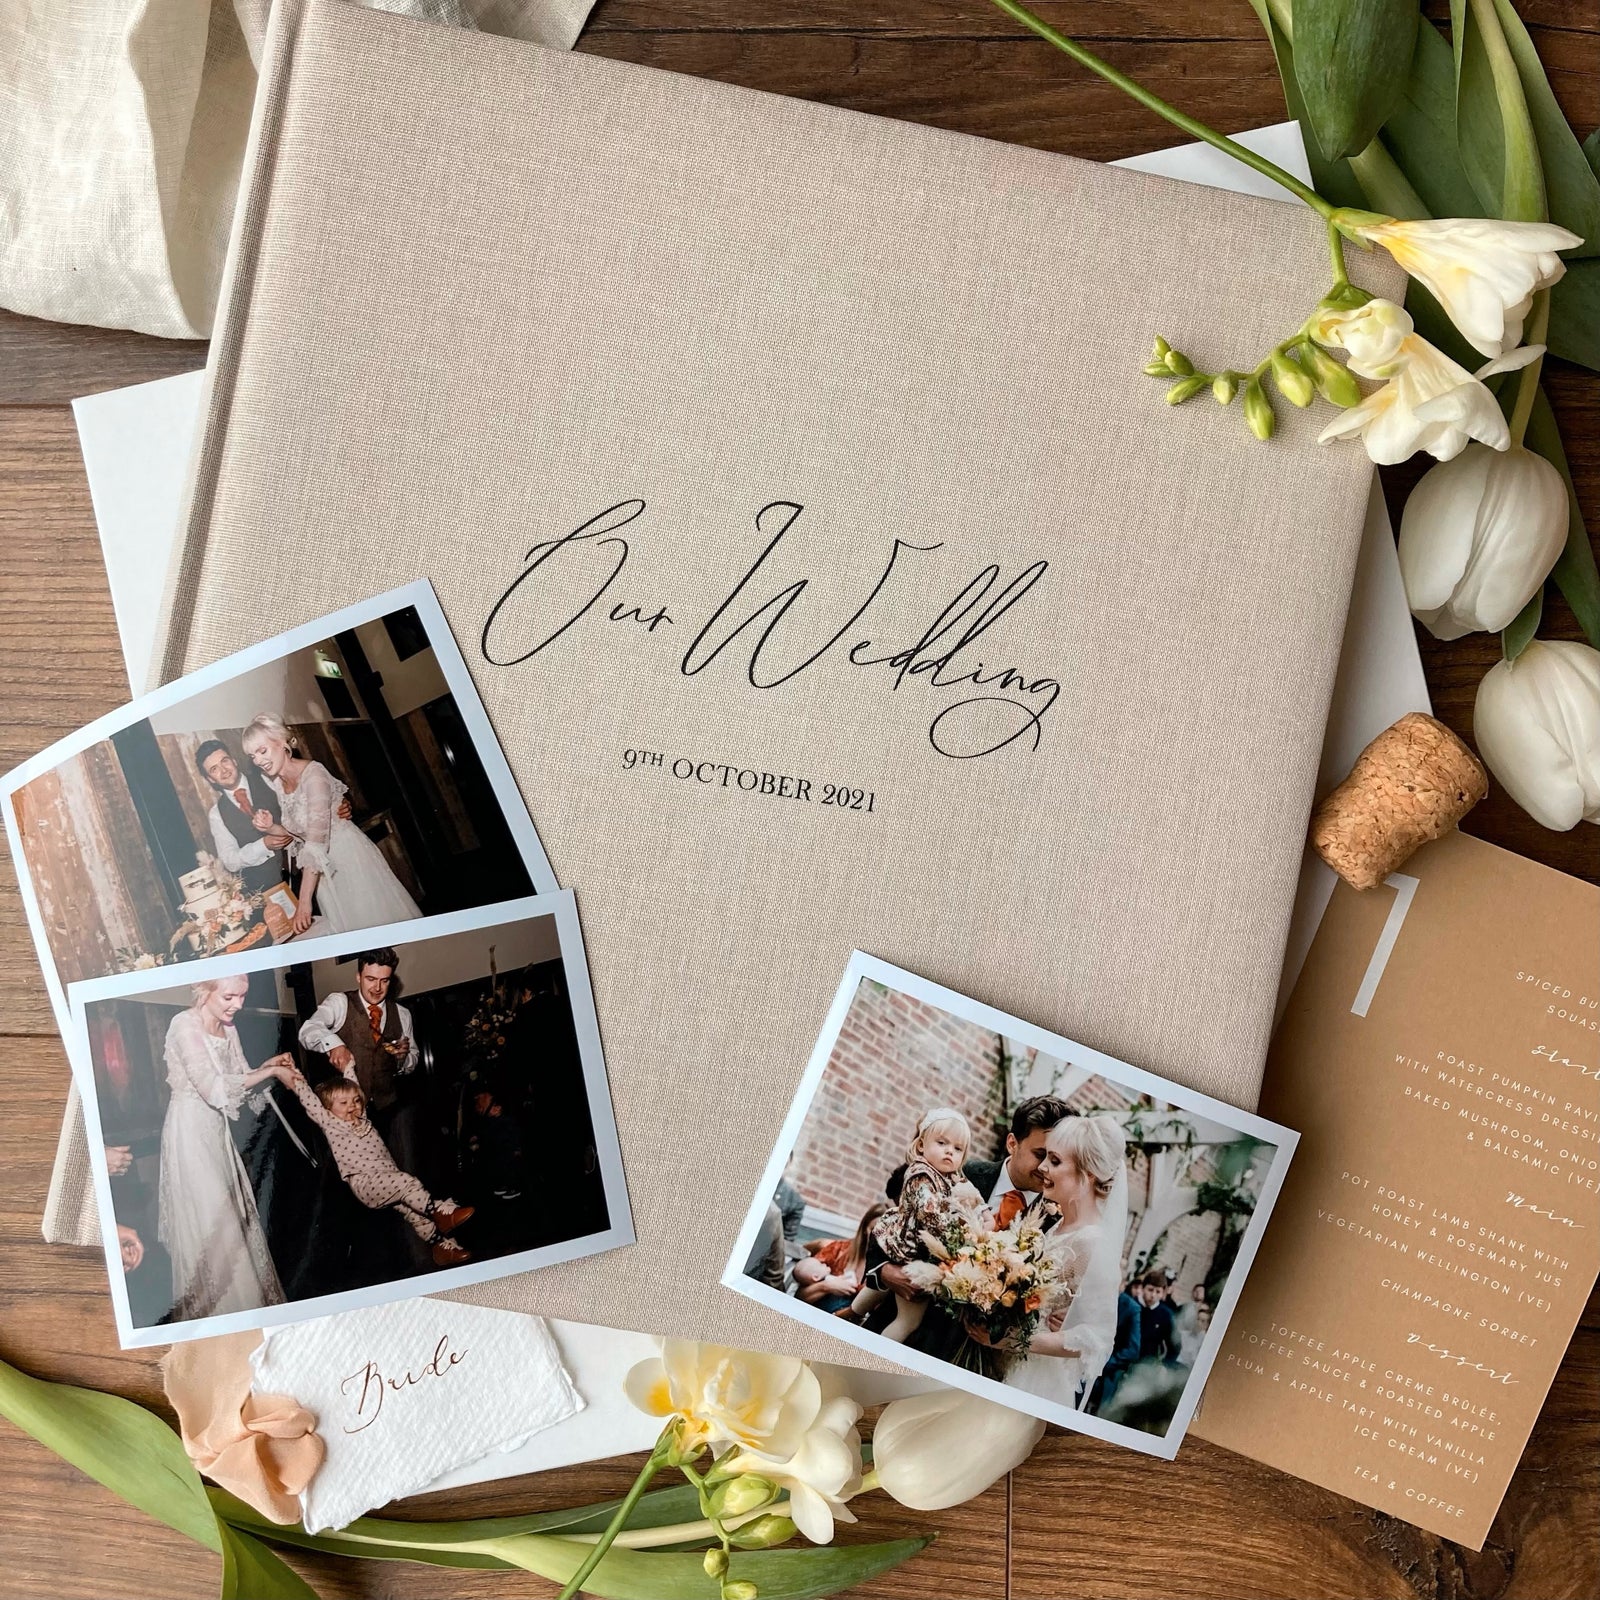 75 Quotes About Love to Include in Your Wedding Photo Album